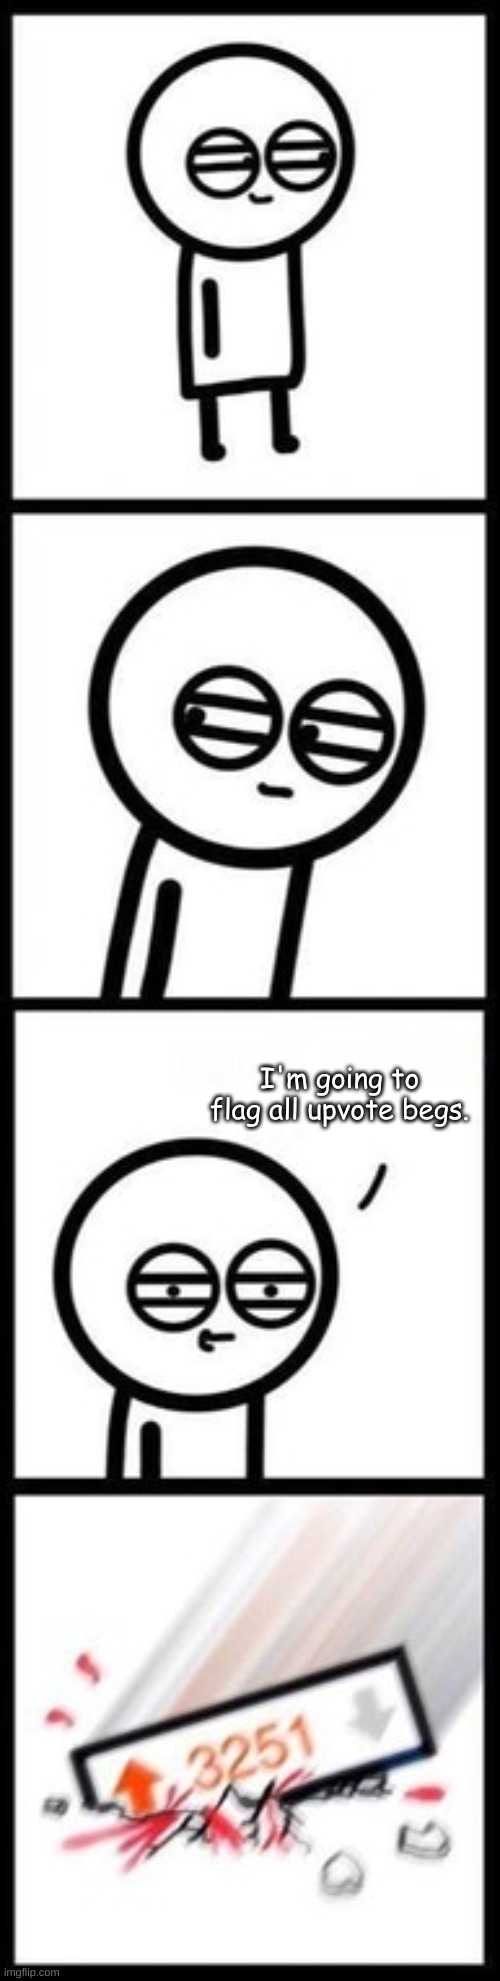 3251 upvotes | I'm going to flag all upvote begs. | image tagged in 3251 upvotes | made w/ Imgflip meme maker